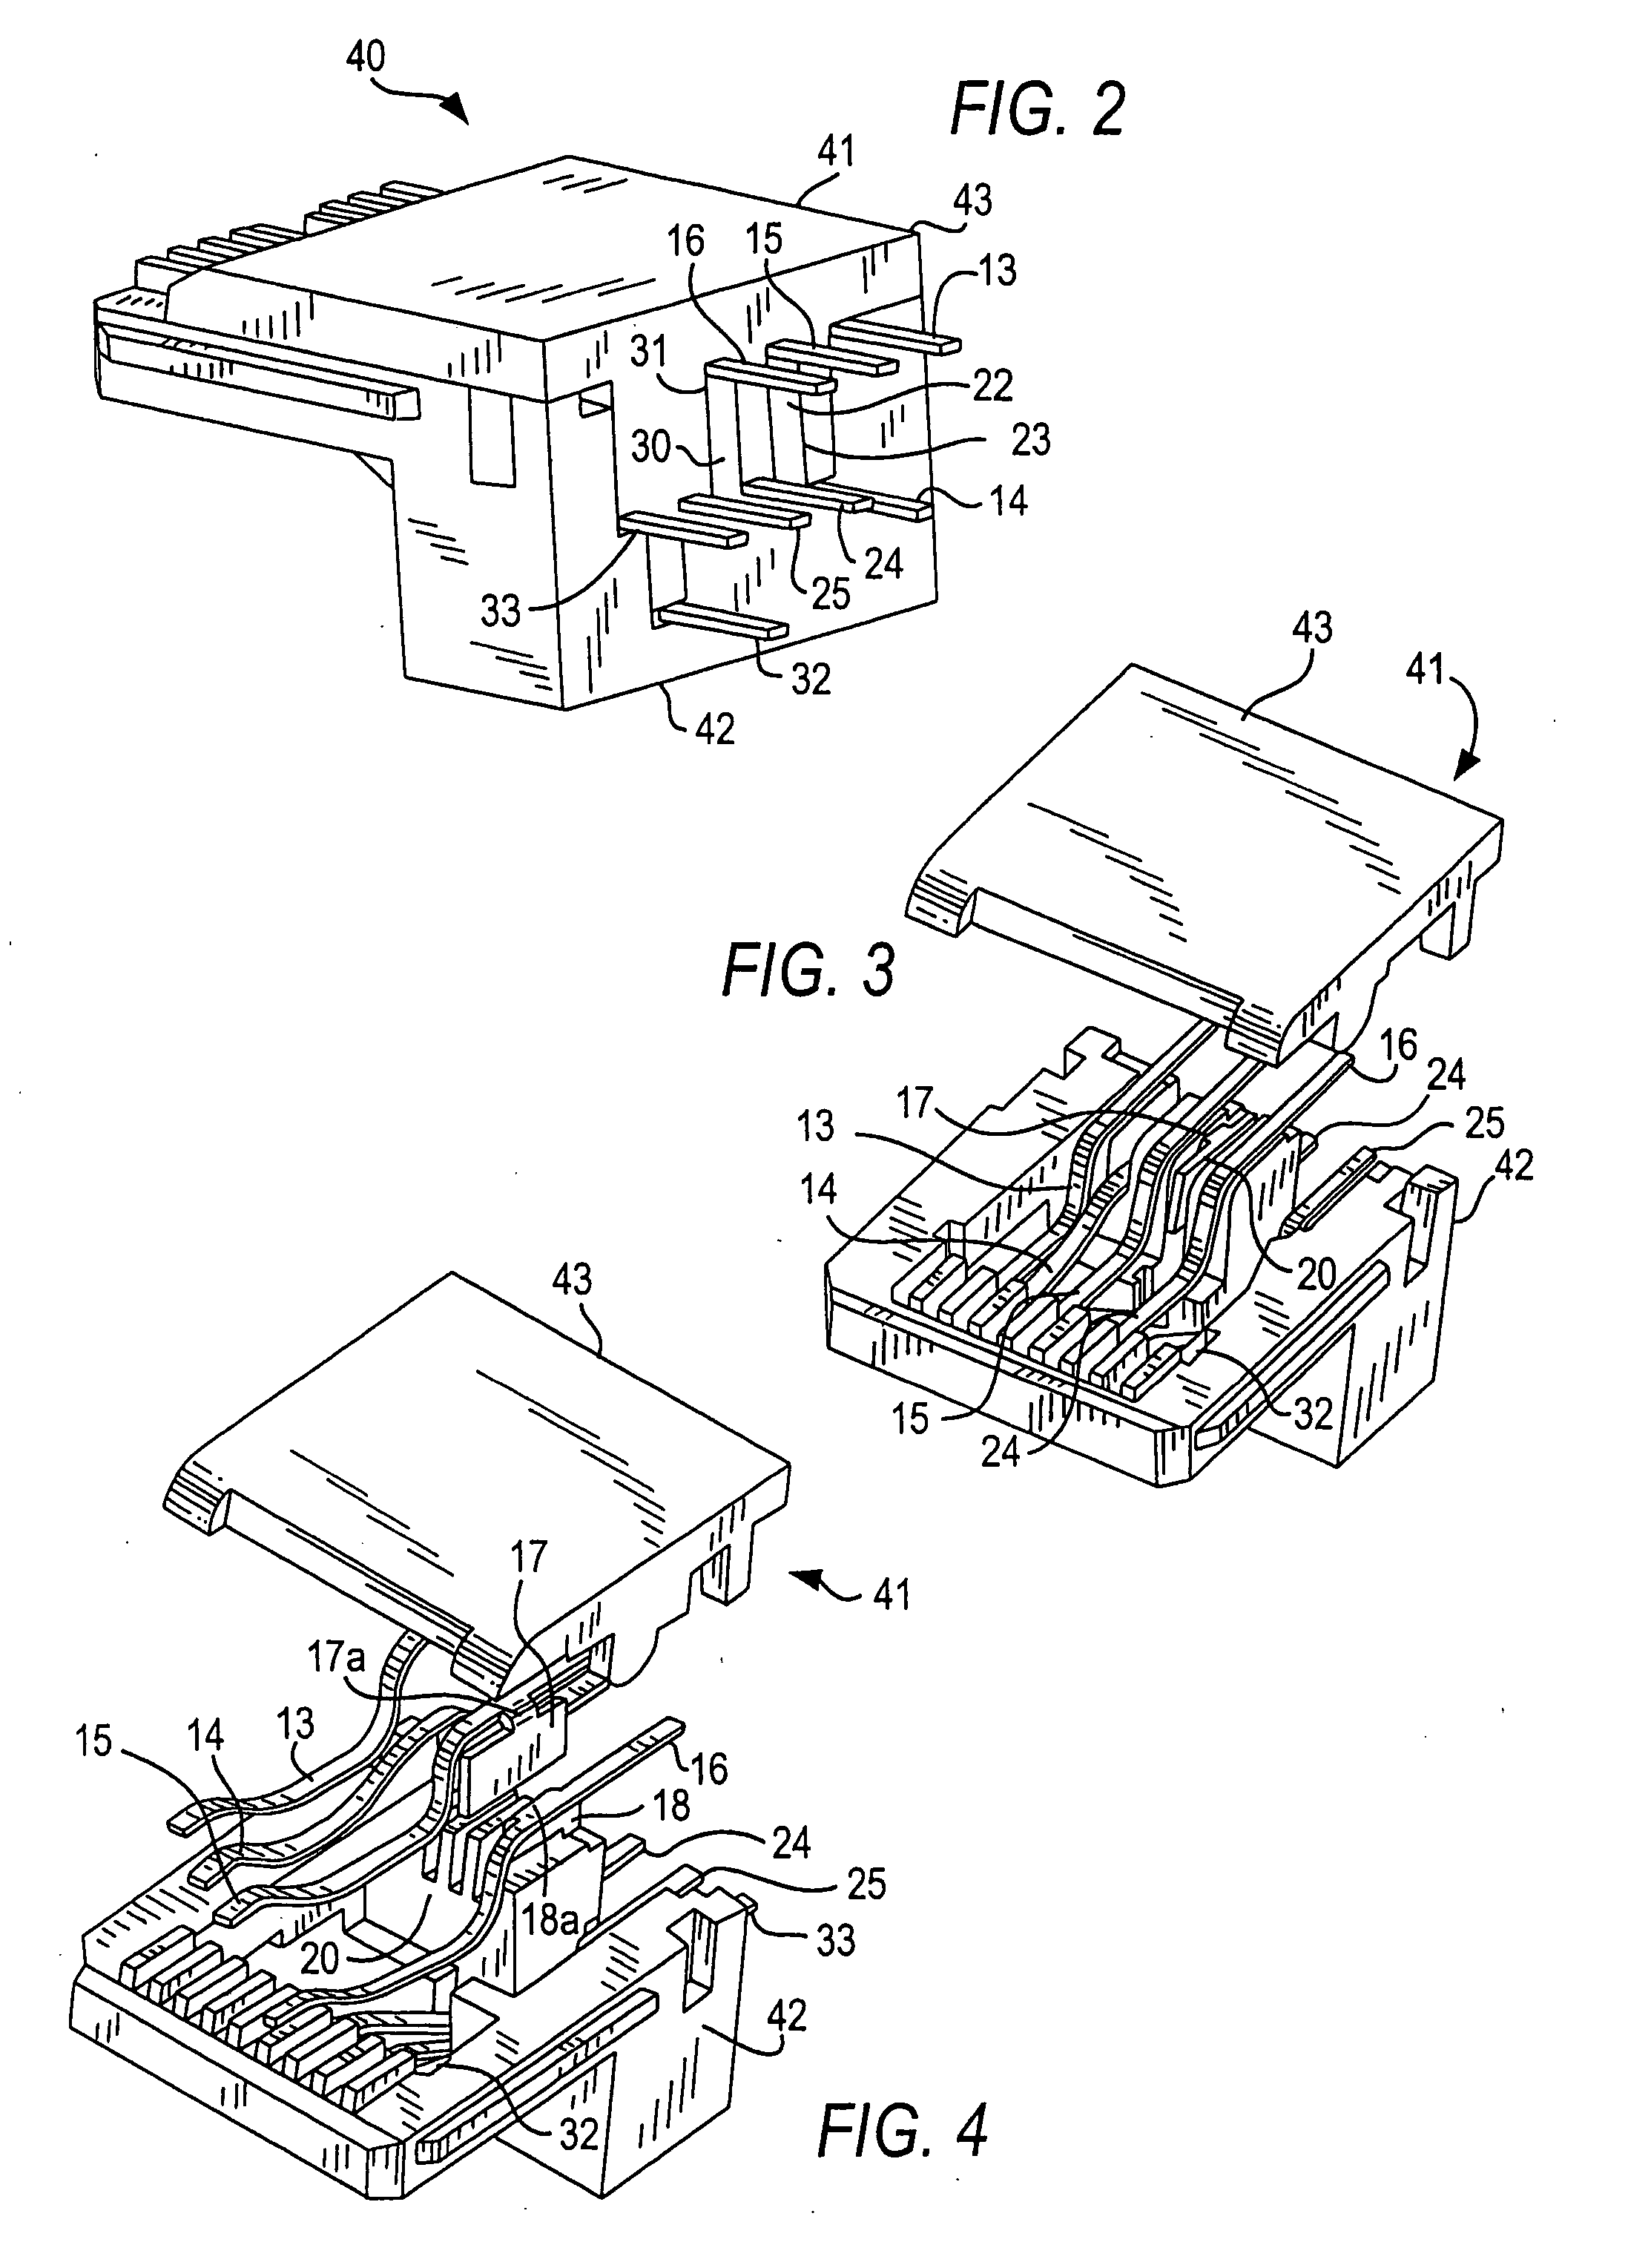 High performance, high capacitance gain, jack connector for data transmission or the like